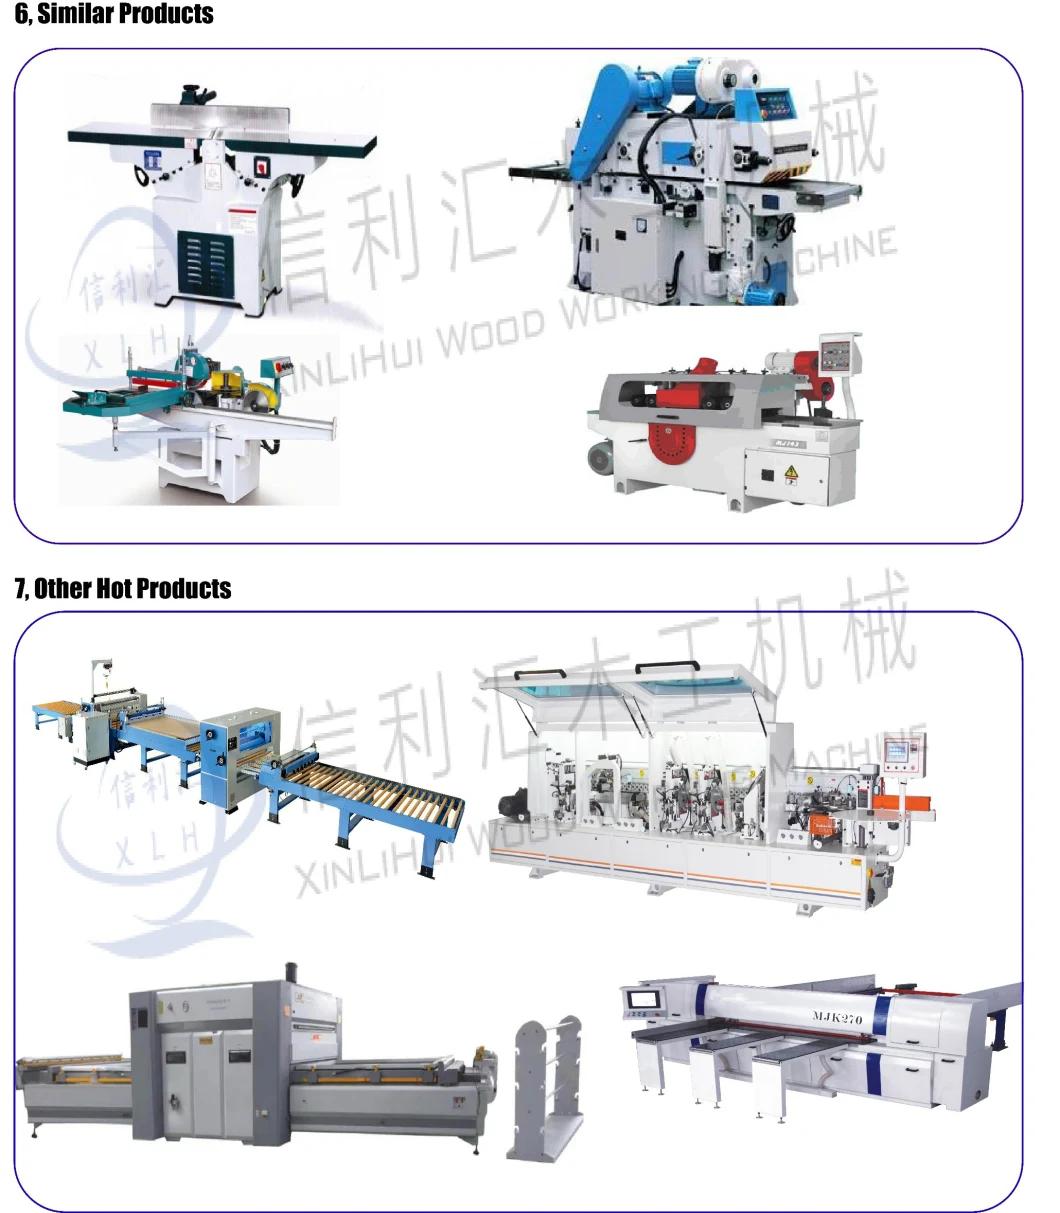 Easily Operation Wood Machine Mx5057 Woodworking Router Bits/ Universal Cutter Milling Machine Price for Woodwind Instrument Woodworking Tools,